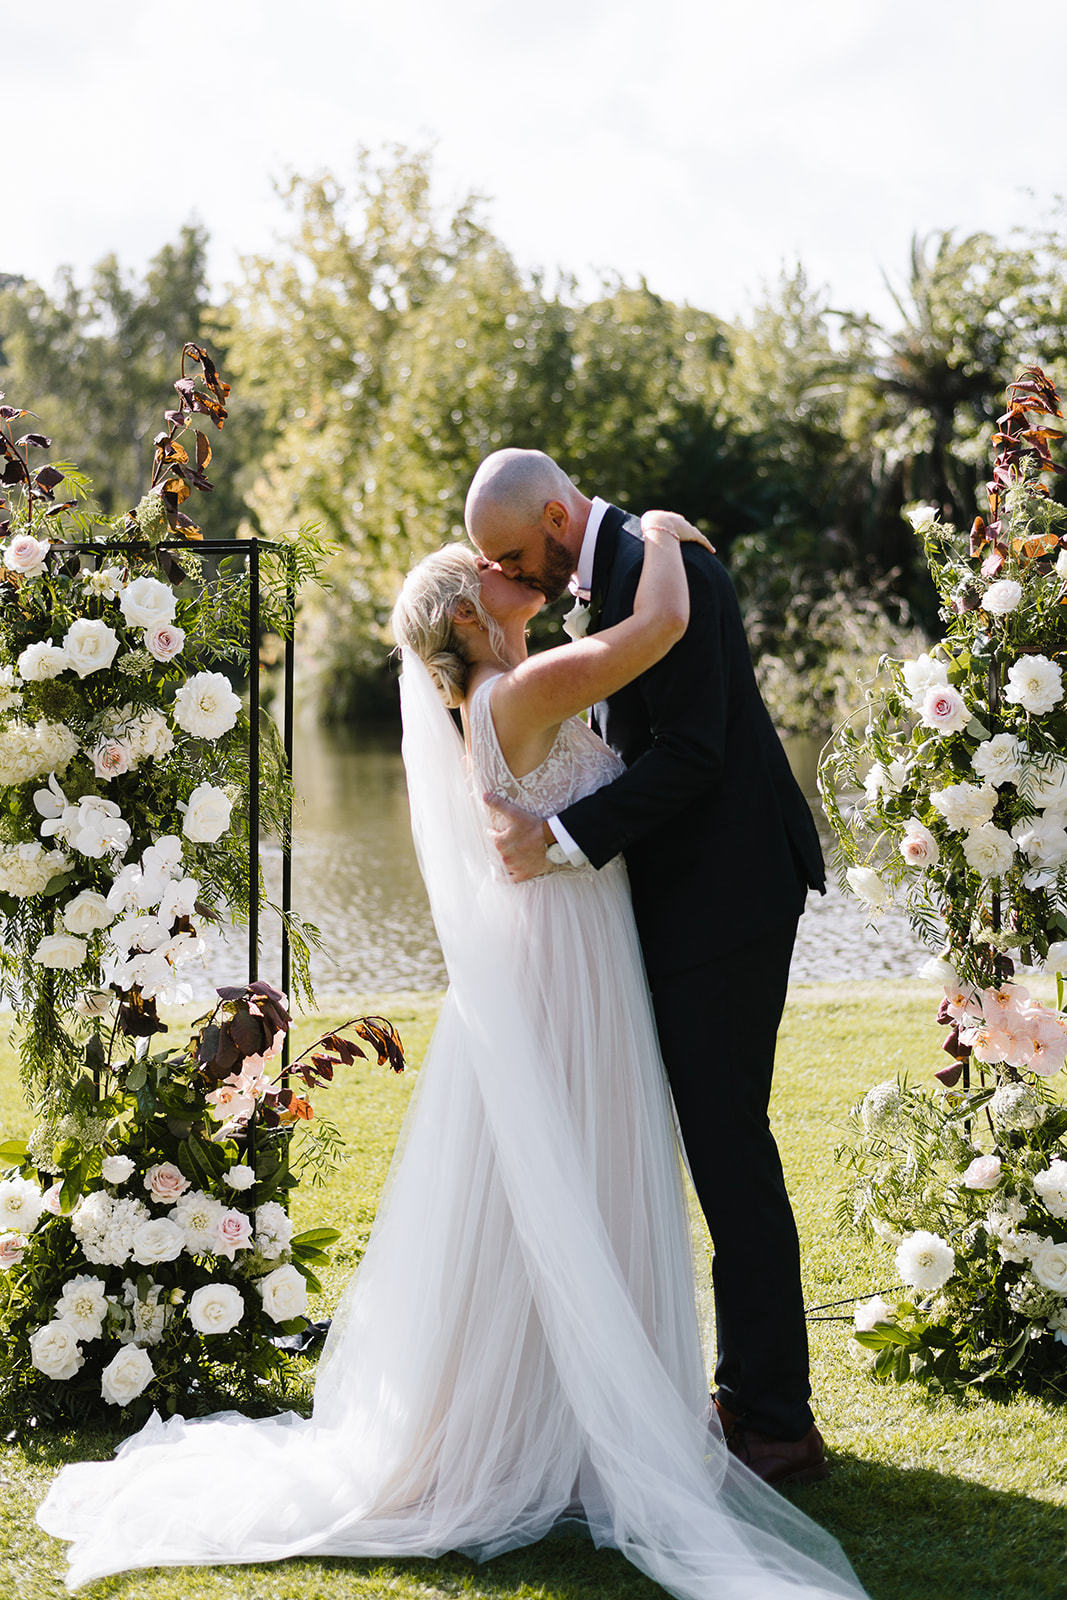 First kiss at The Terrace Royal Botanic Gardens Melbourne wedding